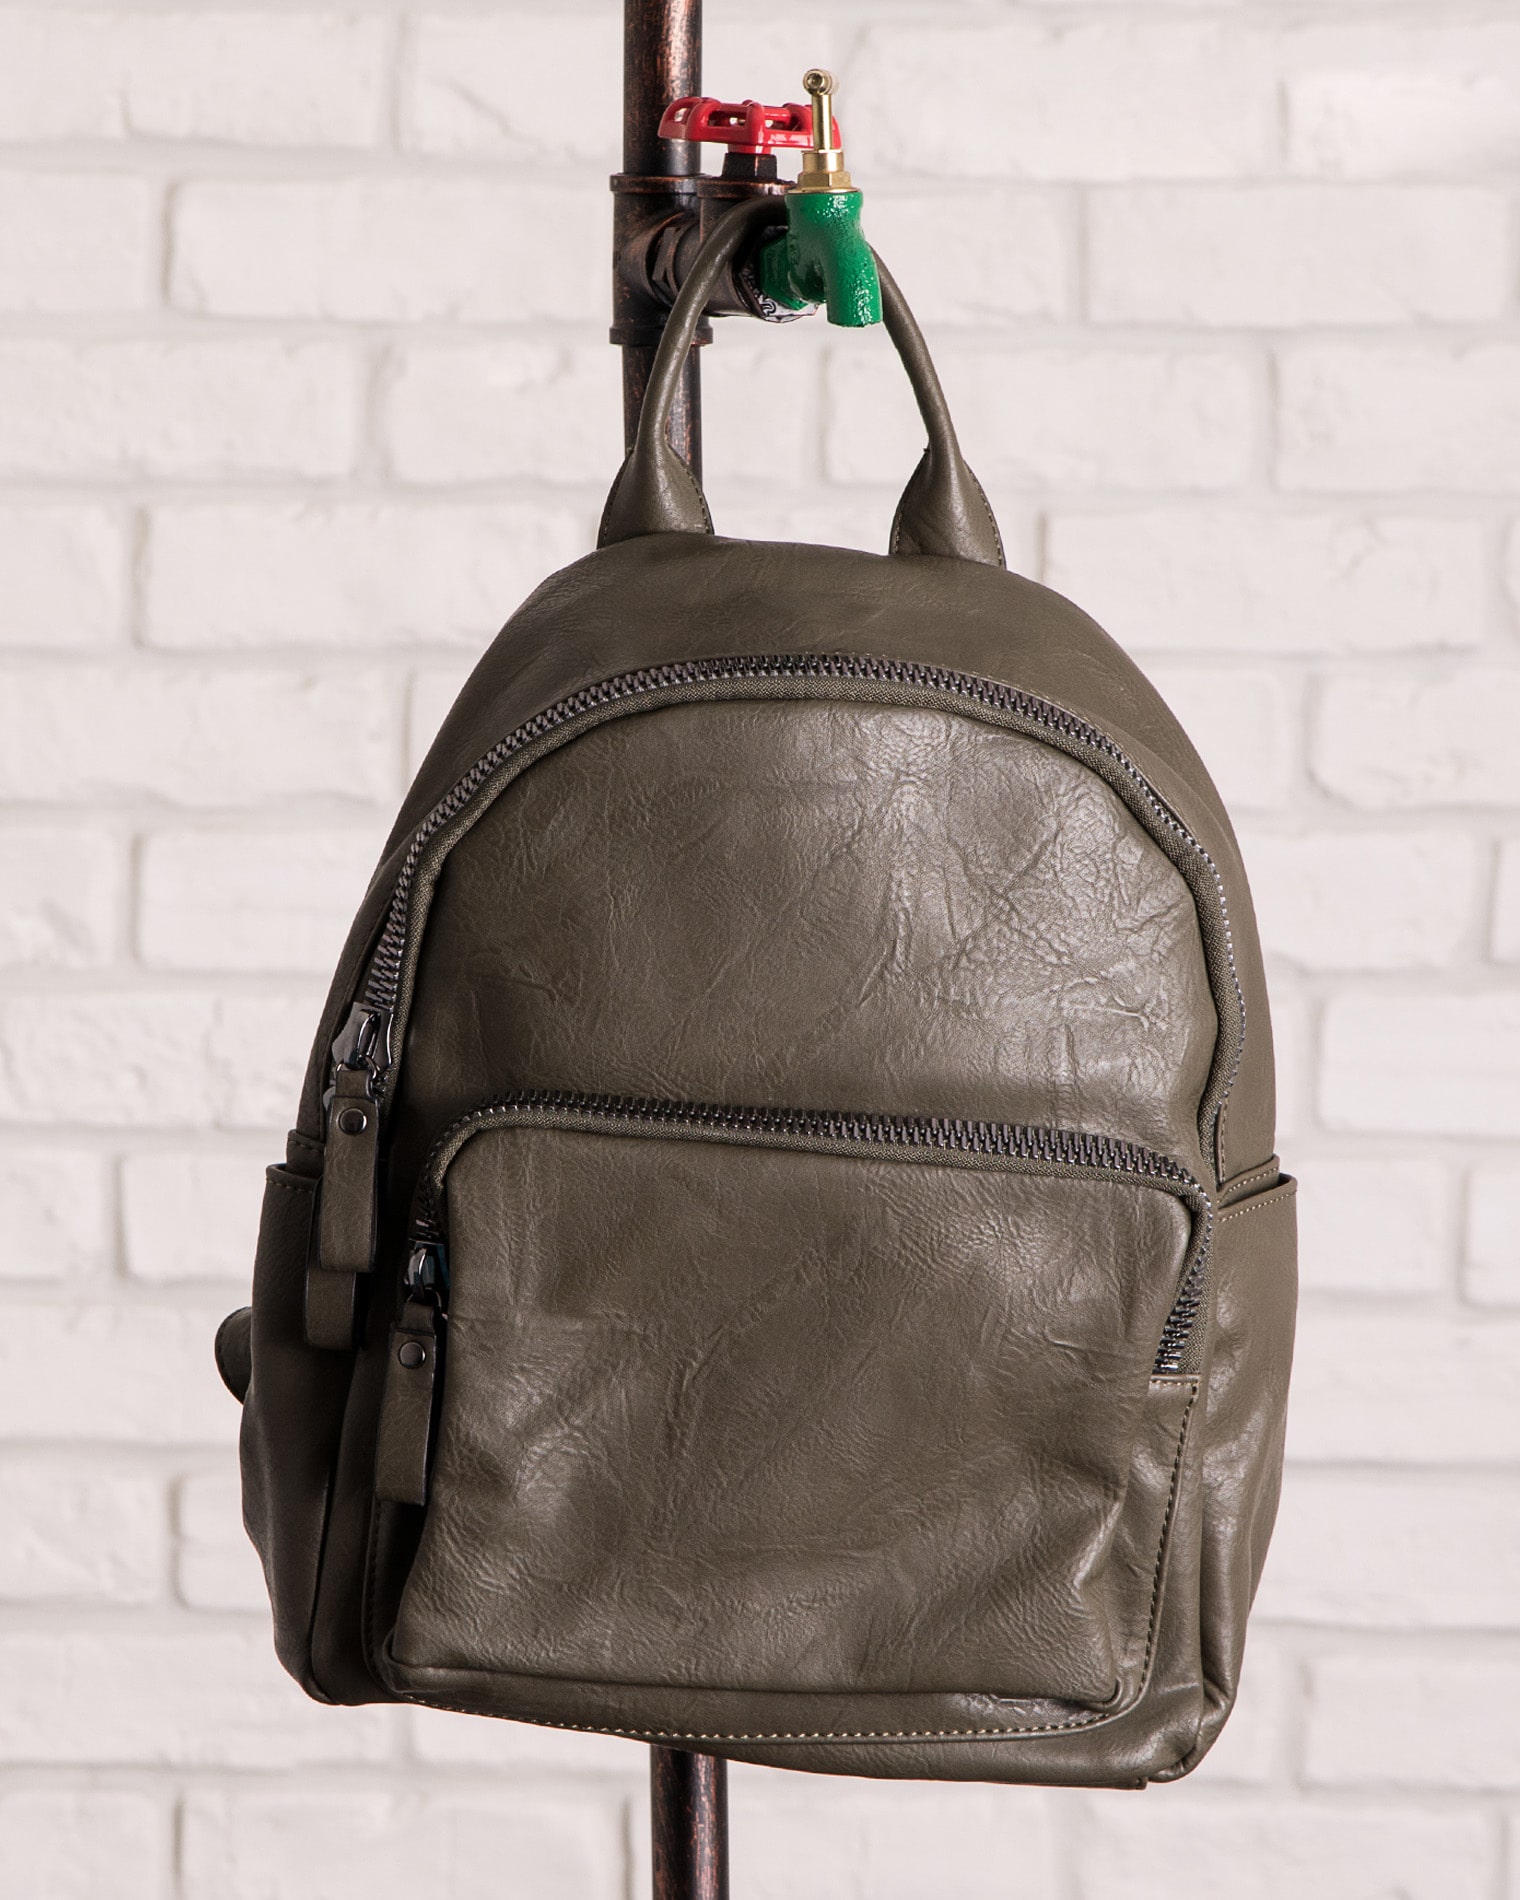 Inferno Backpack, Green Color